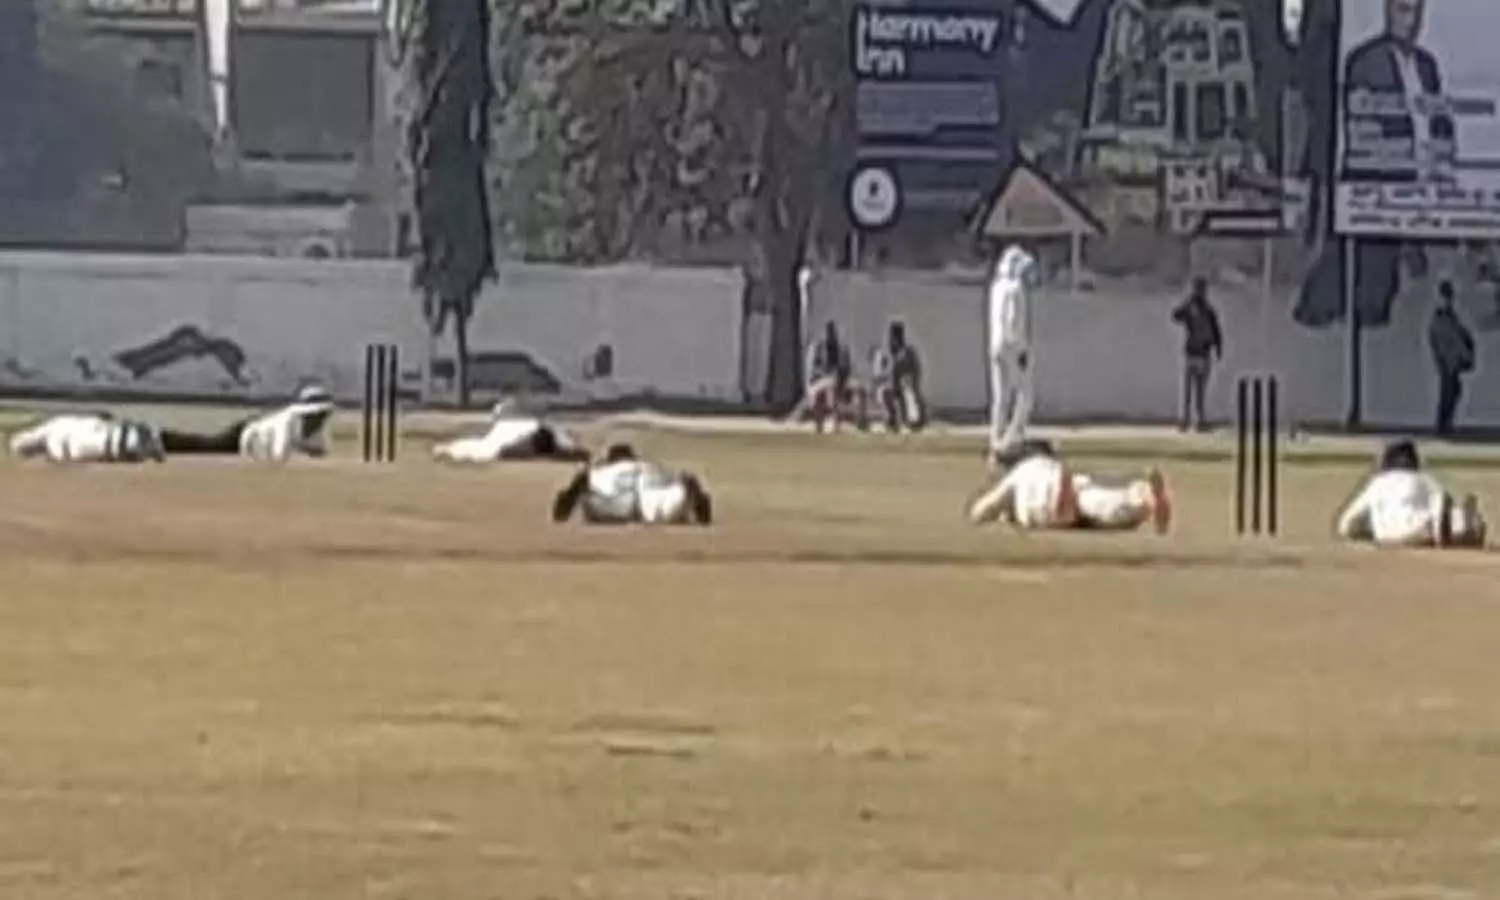 Bees attack during Ranji match at Bhamashah Park in Meerut, chaos created